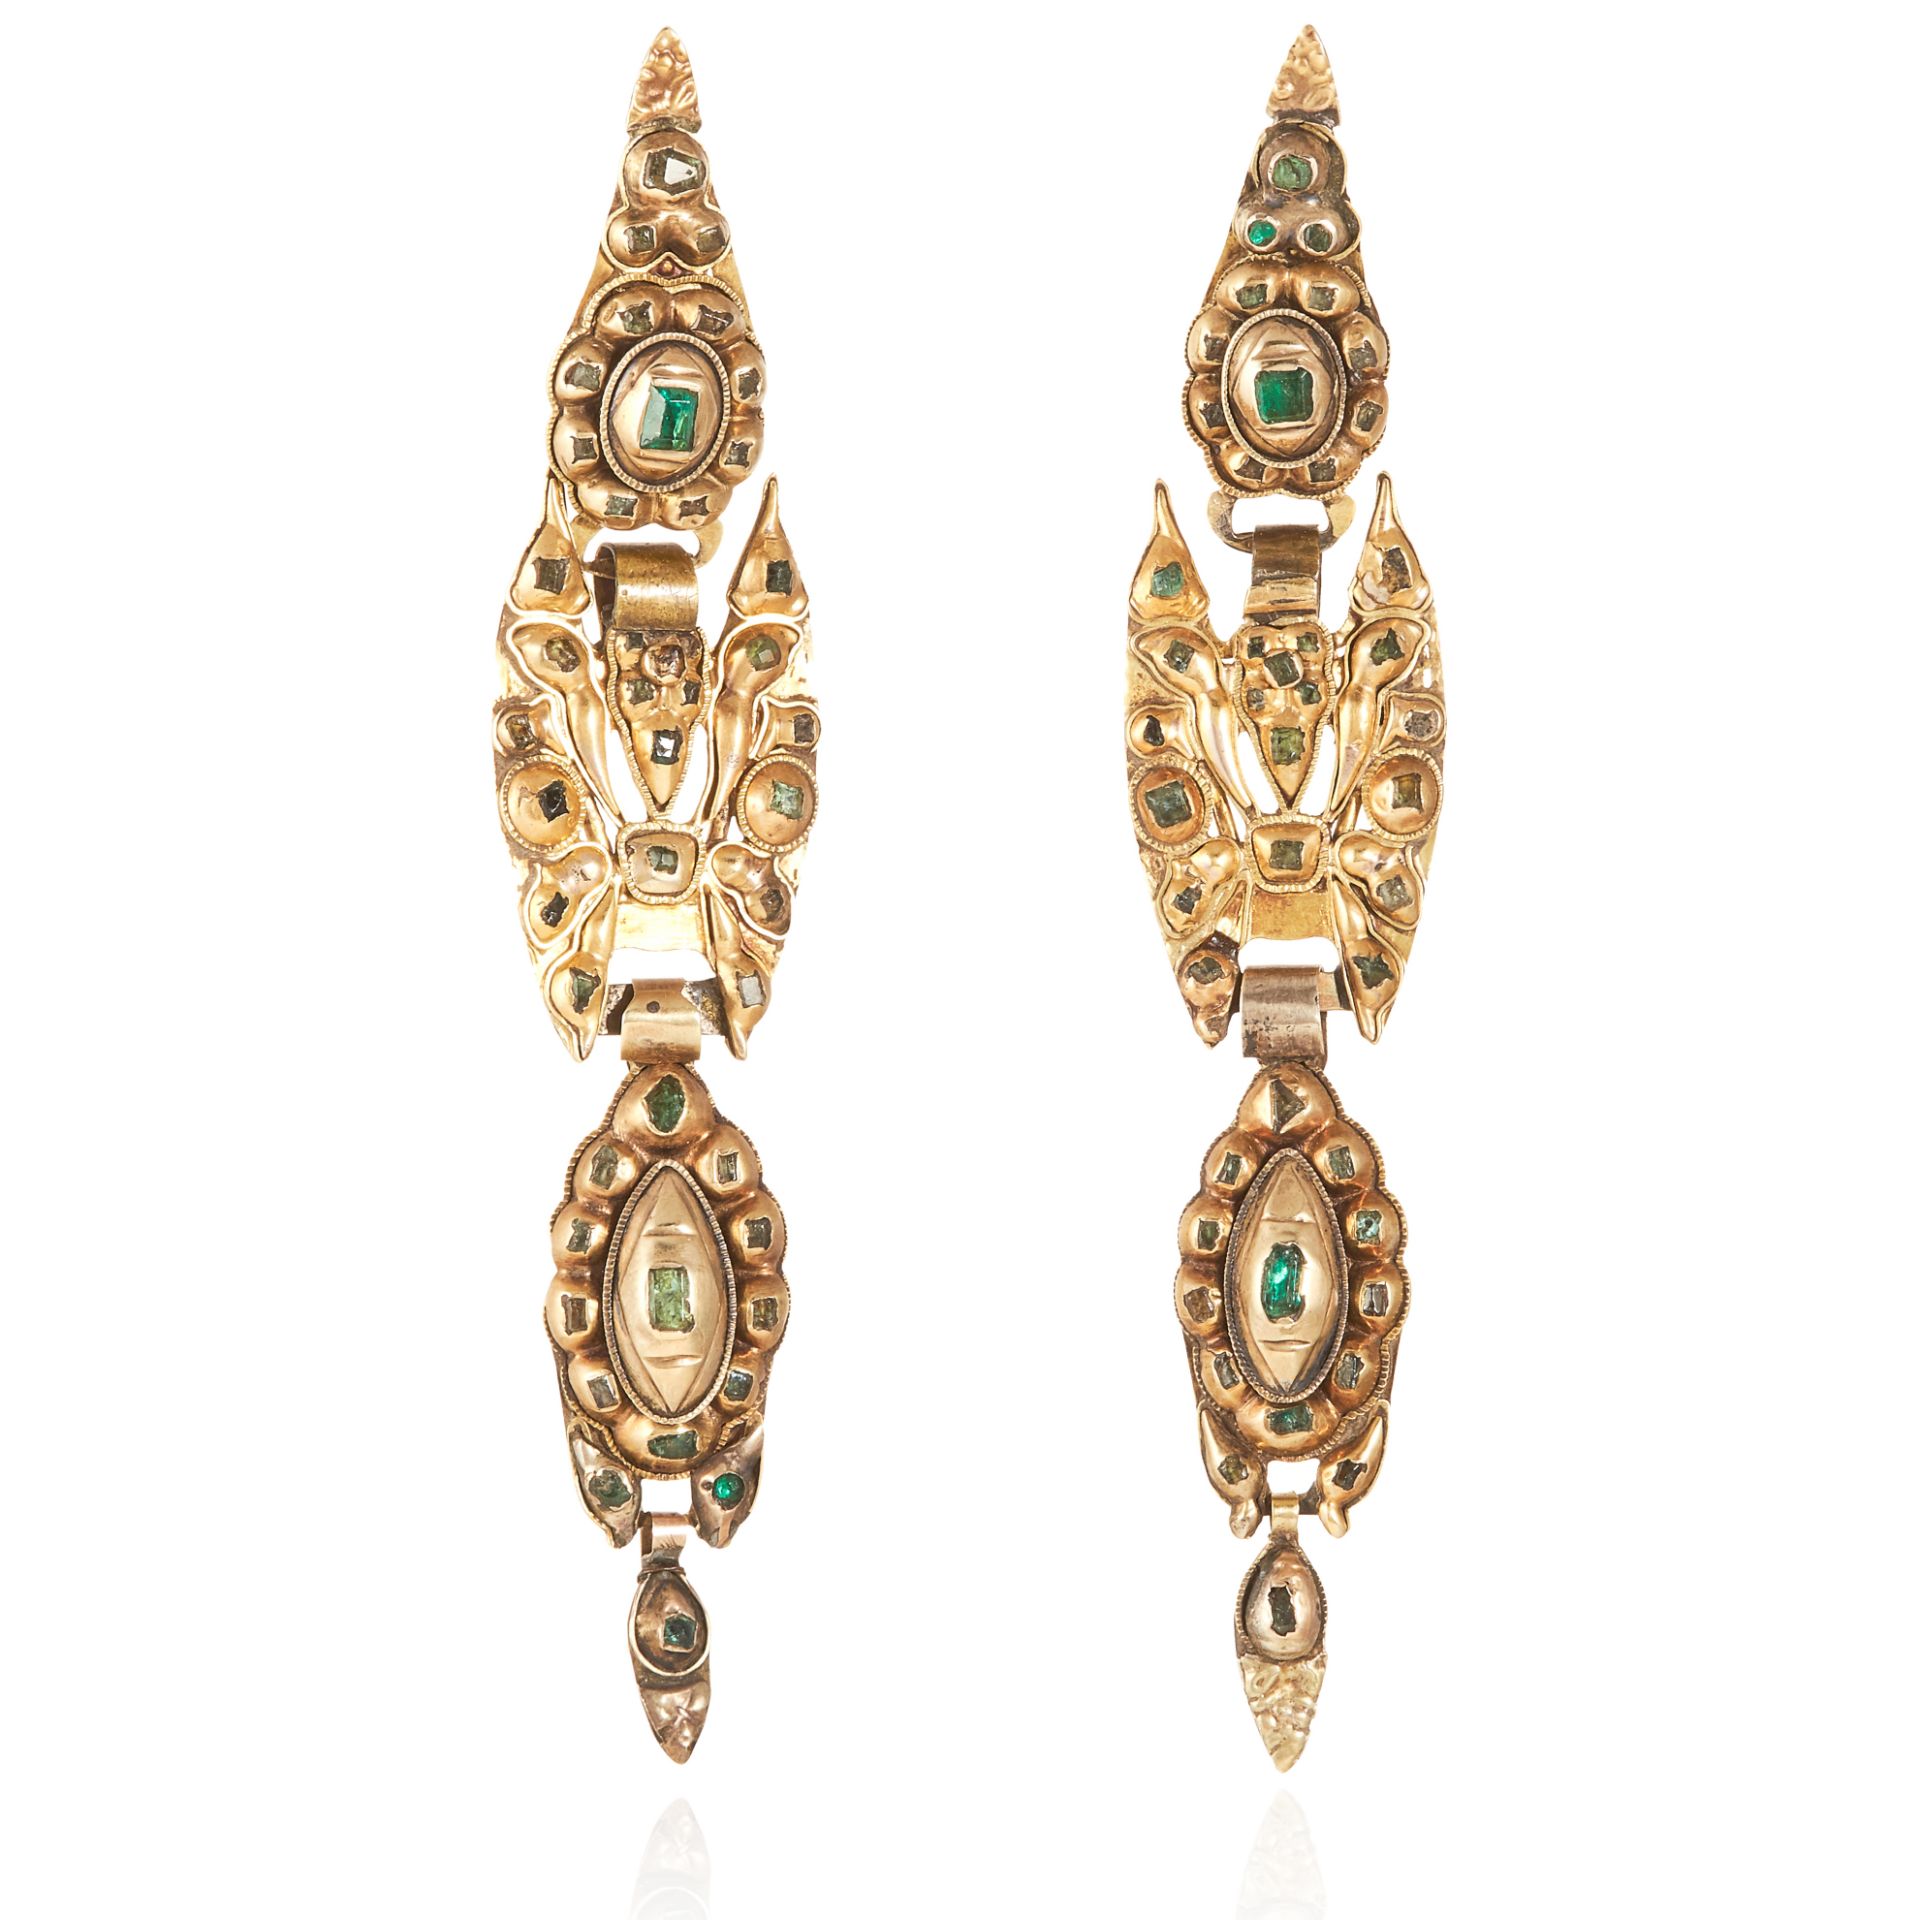 A PAIR OF ANTIQUE CATALAN EMERALD AND DIAMOND EARRINGS, SPANISH CIRCA 1800 in high carat yellow